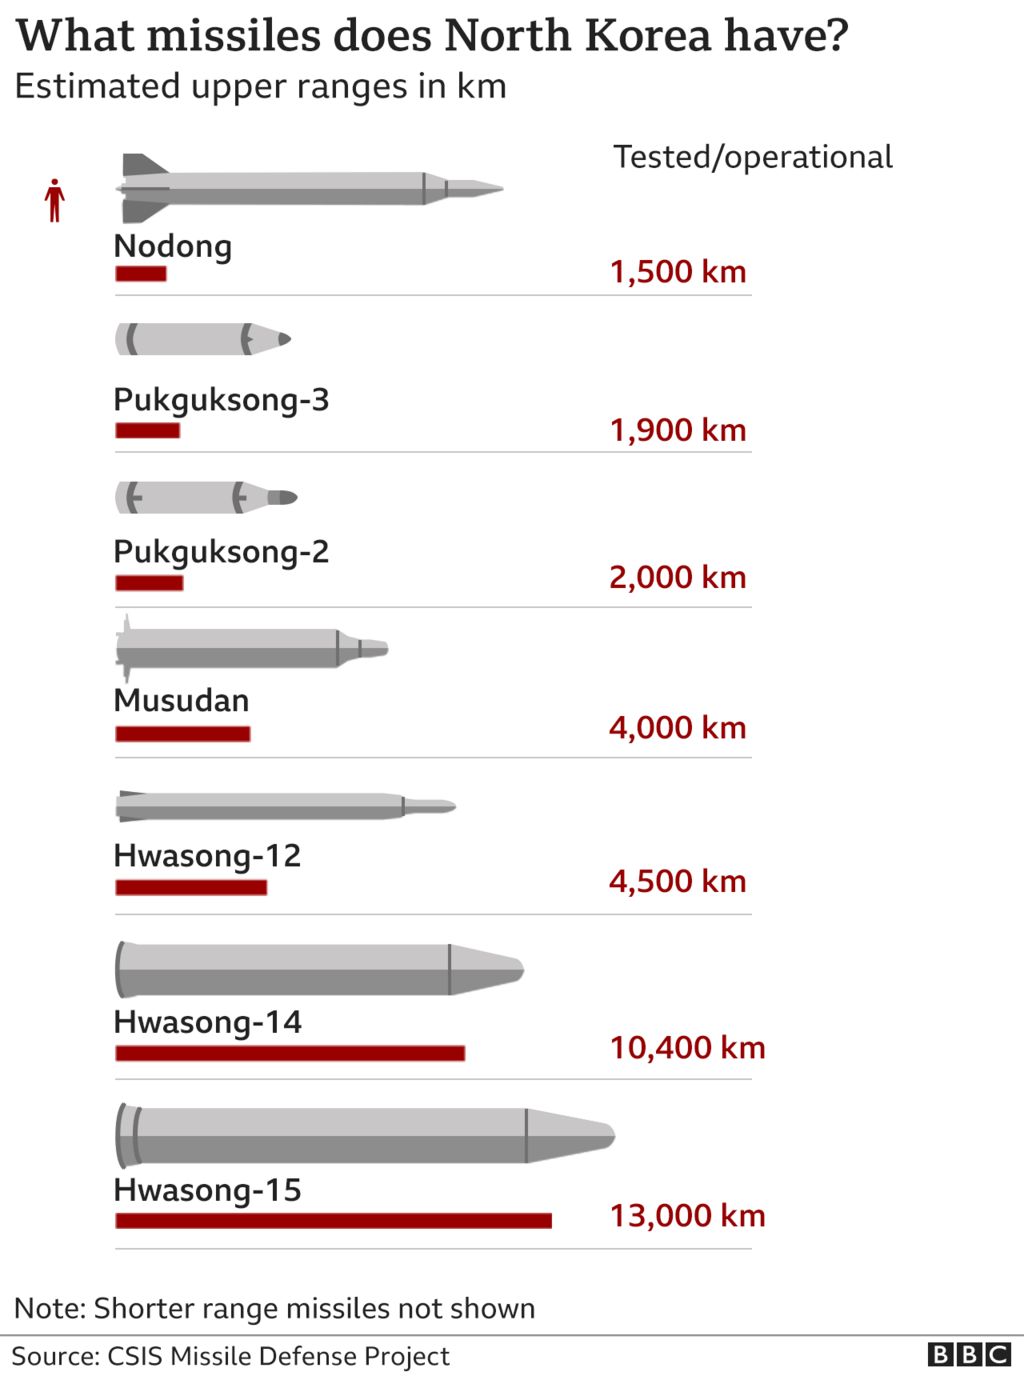 Chart showing the main long-range missiles in North Korea